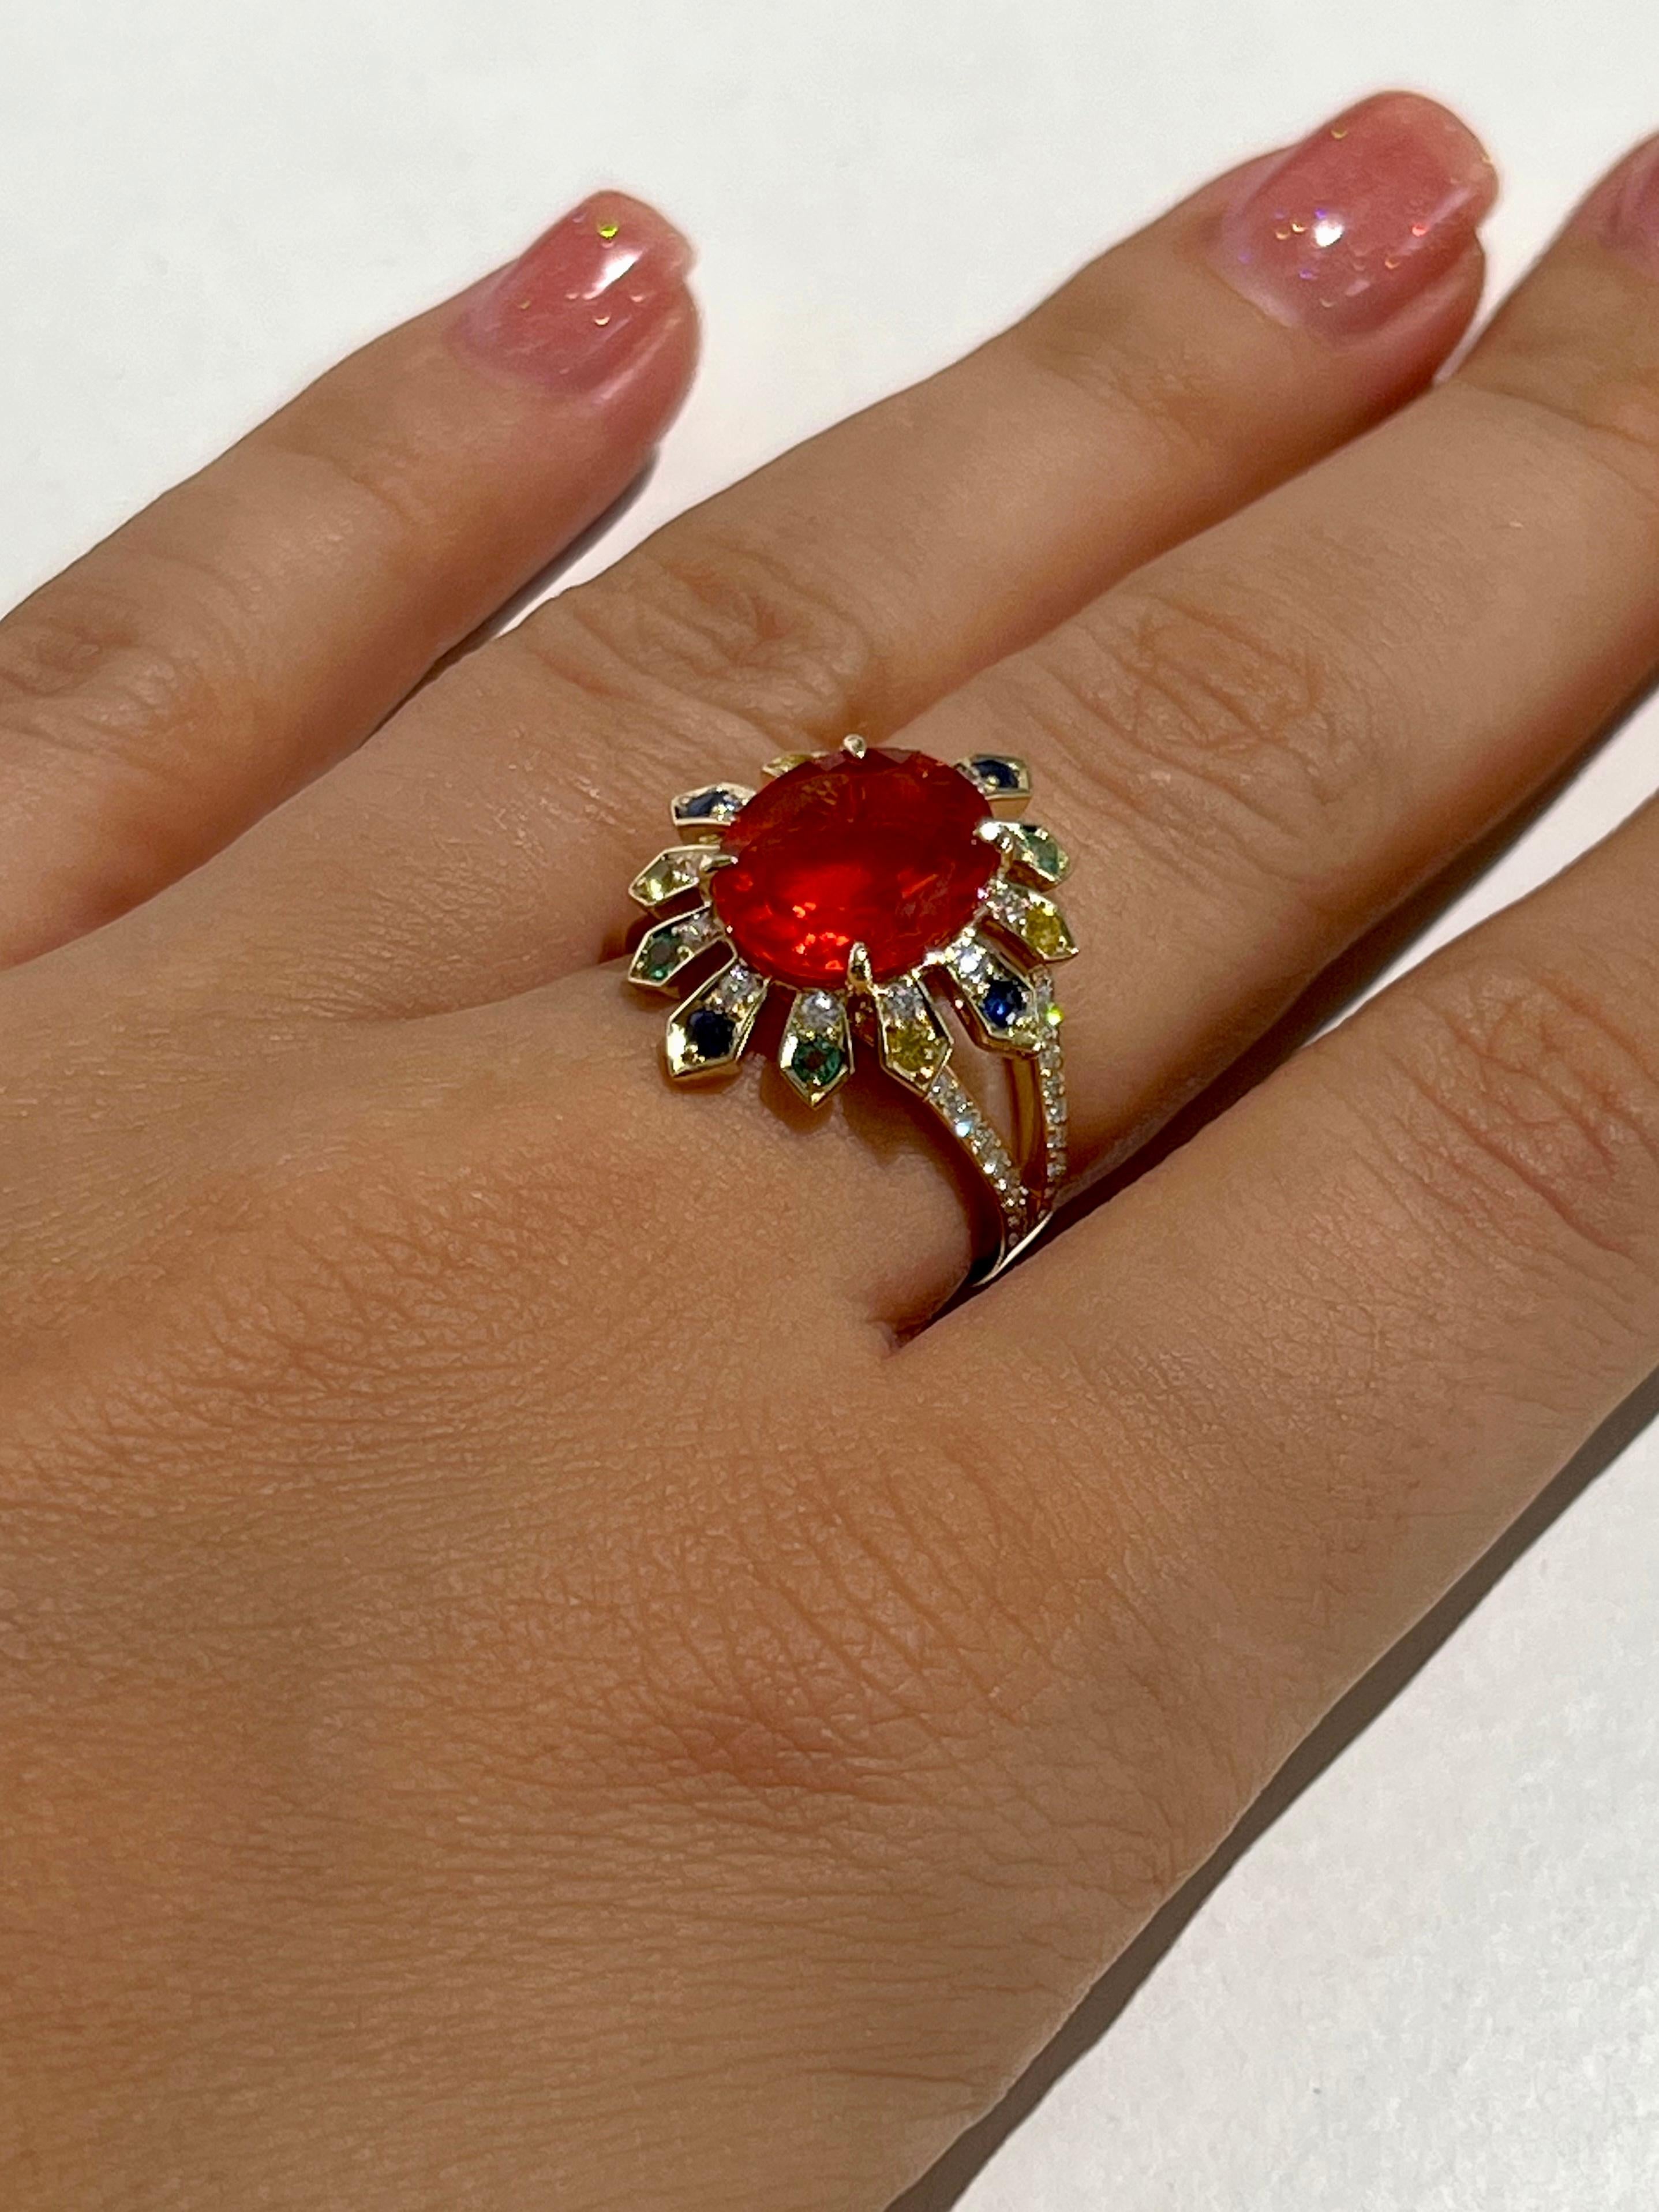 Emerald Cut 3 Carat Mexican Fire Opal Ring with Sapphires, Emeralds and Diamonds in 18k Gold